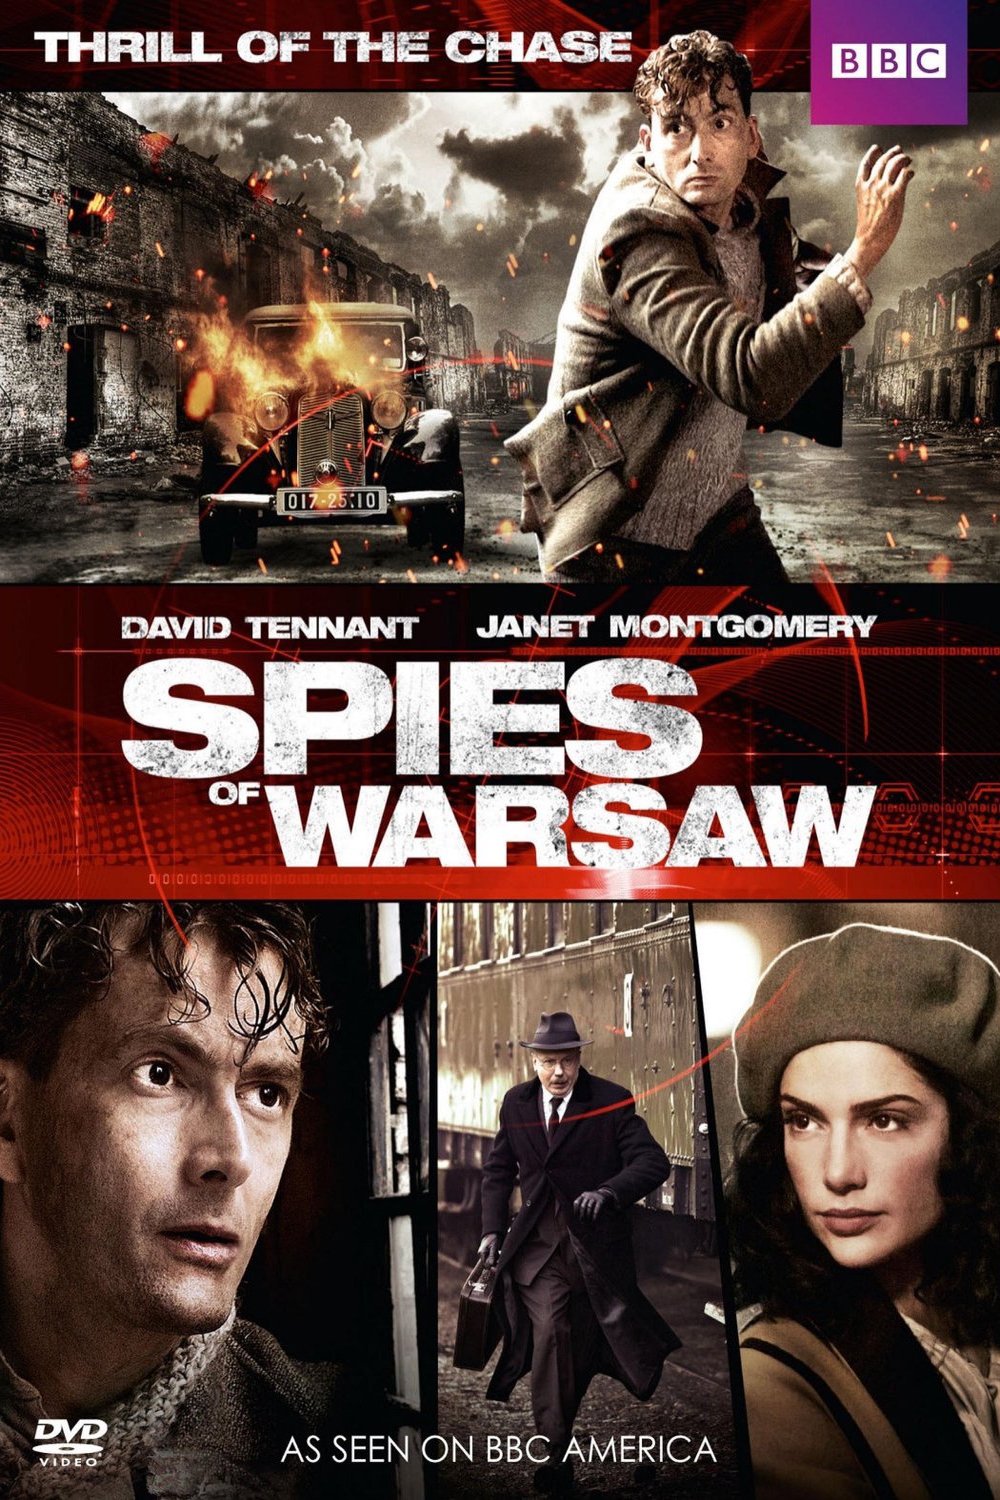 Poster of the movie Spies of Warsaw